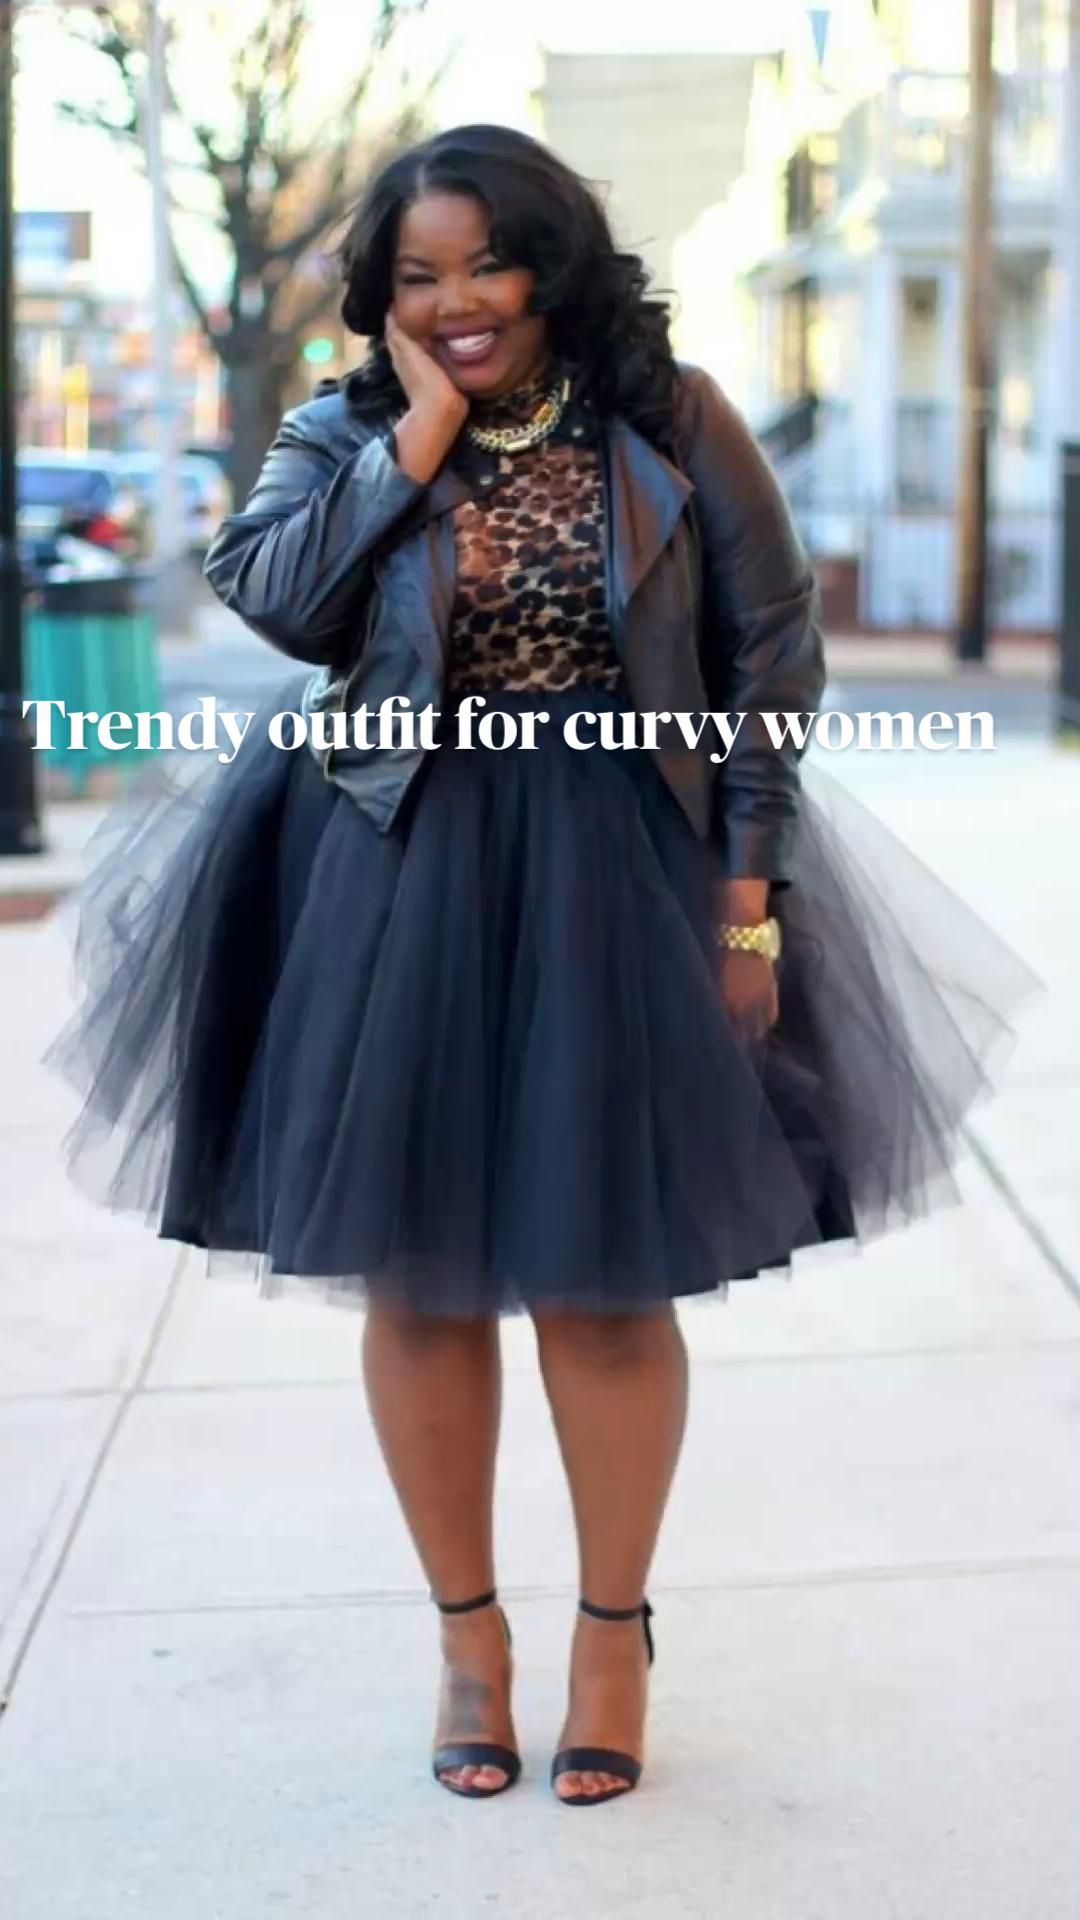 Trendy outfit for curvy women